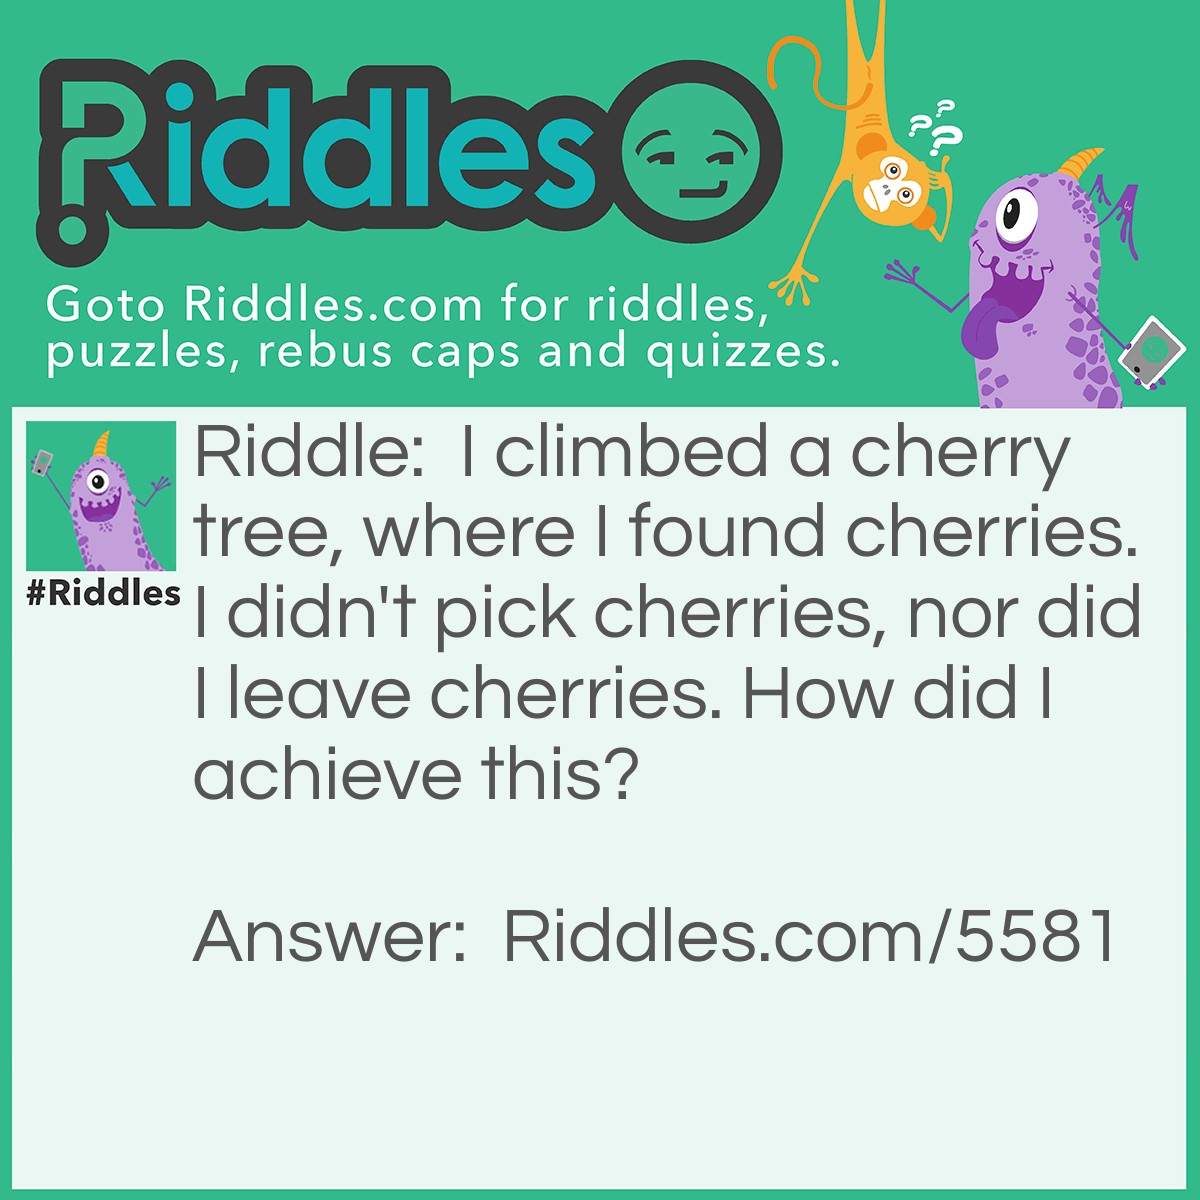 Riddle: I climbed a cherry tree, where I found cherries. I didn't pick cherries, nor did I leave cherries. How did I achieve this? Answer: The cherry tree held two cherries. I pick a cherry and left a cherry.